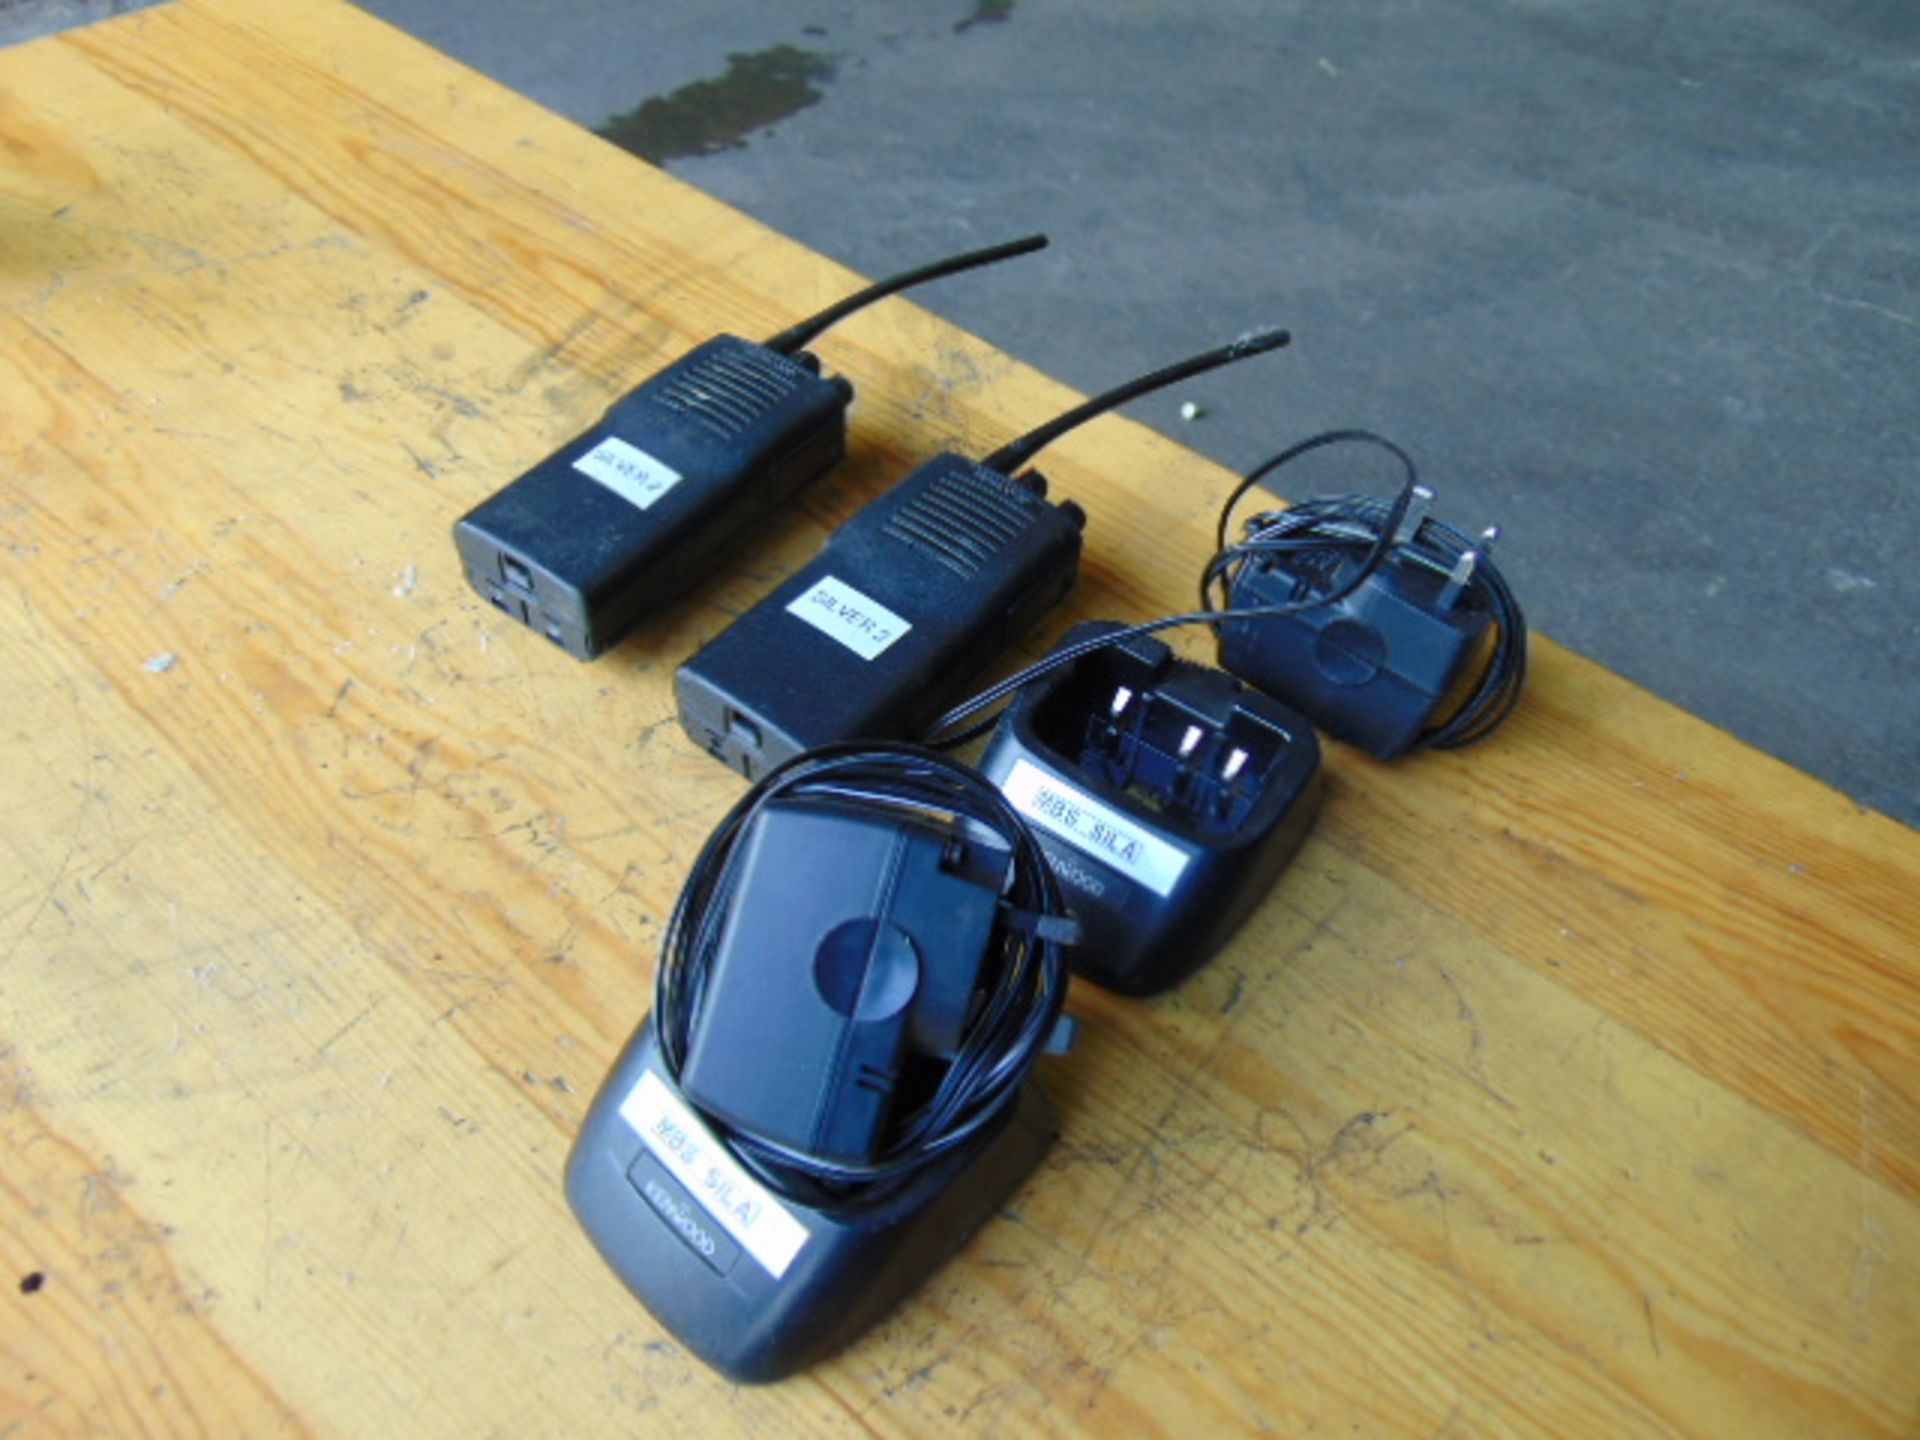 2 x Kenwood Walkie Talkies c/w Chargers and Main Adapters - Image 3 of 6